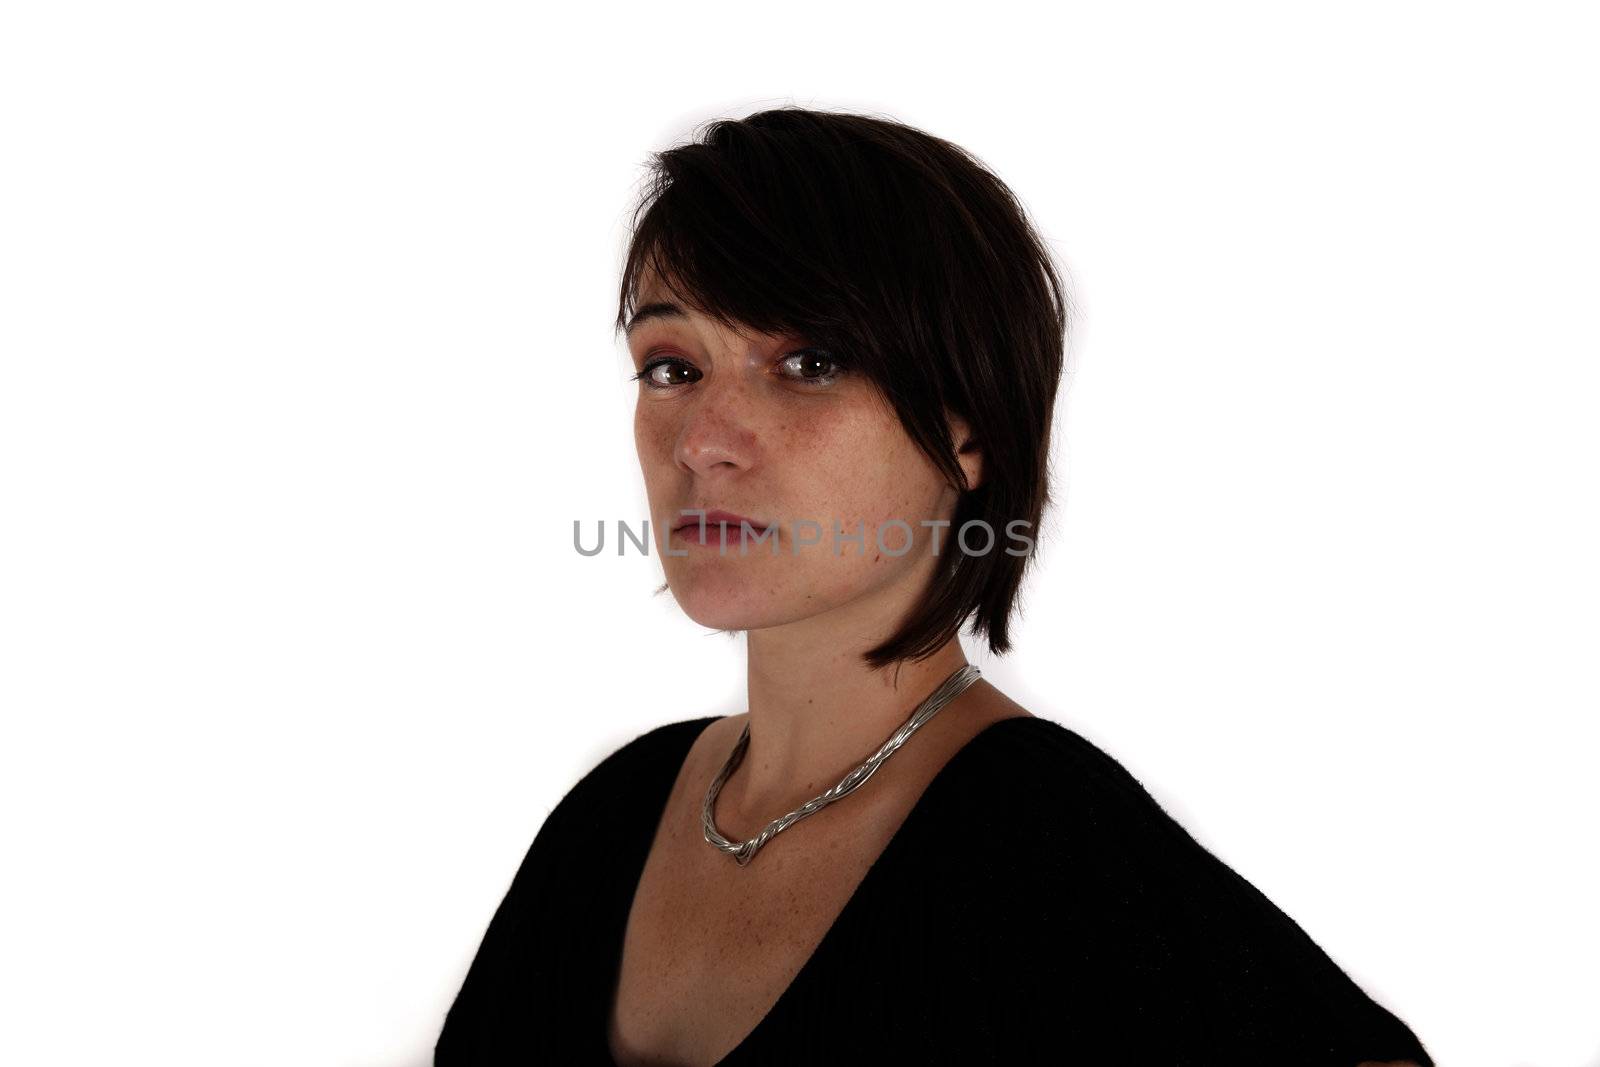 variation of expression on the face of a young brunette woman in studio with a colored scarf